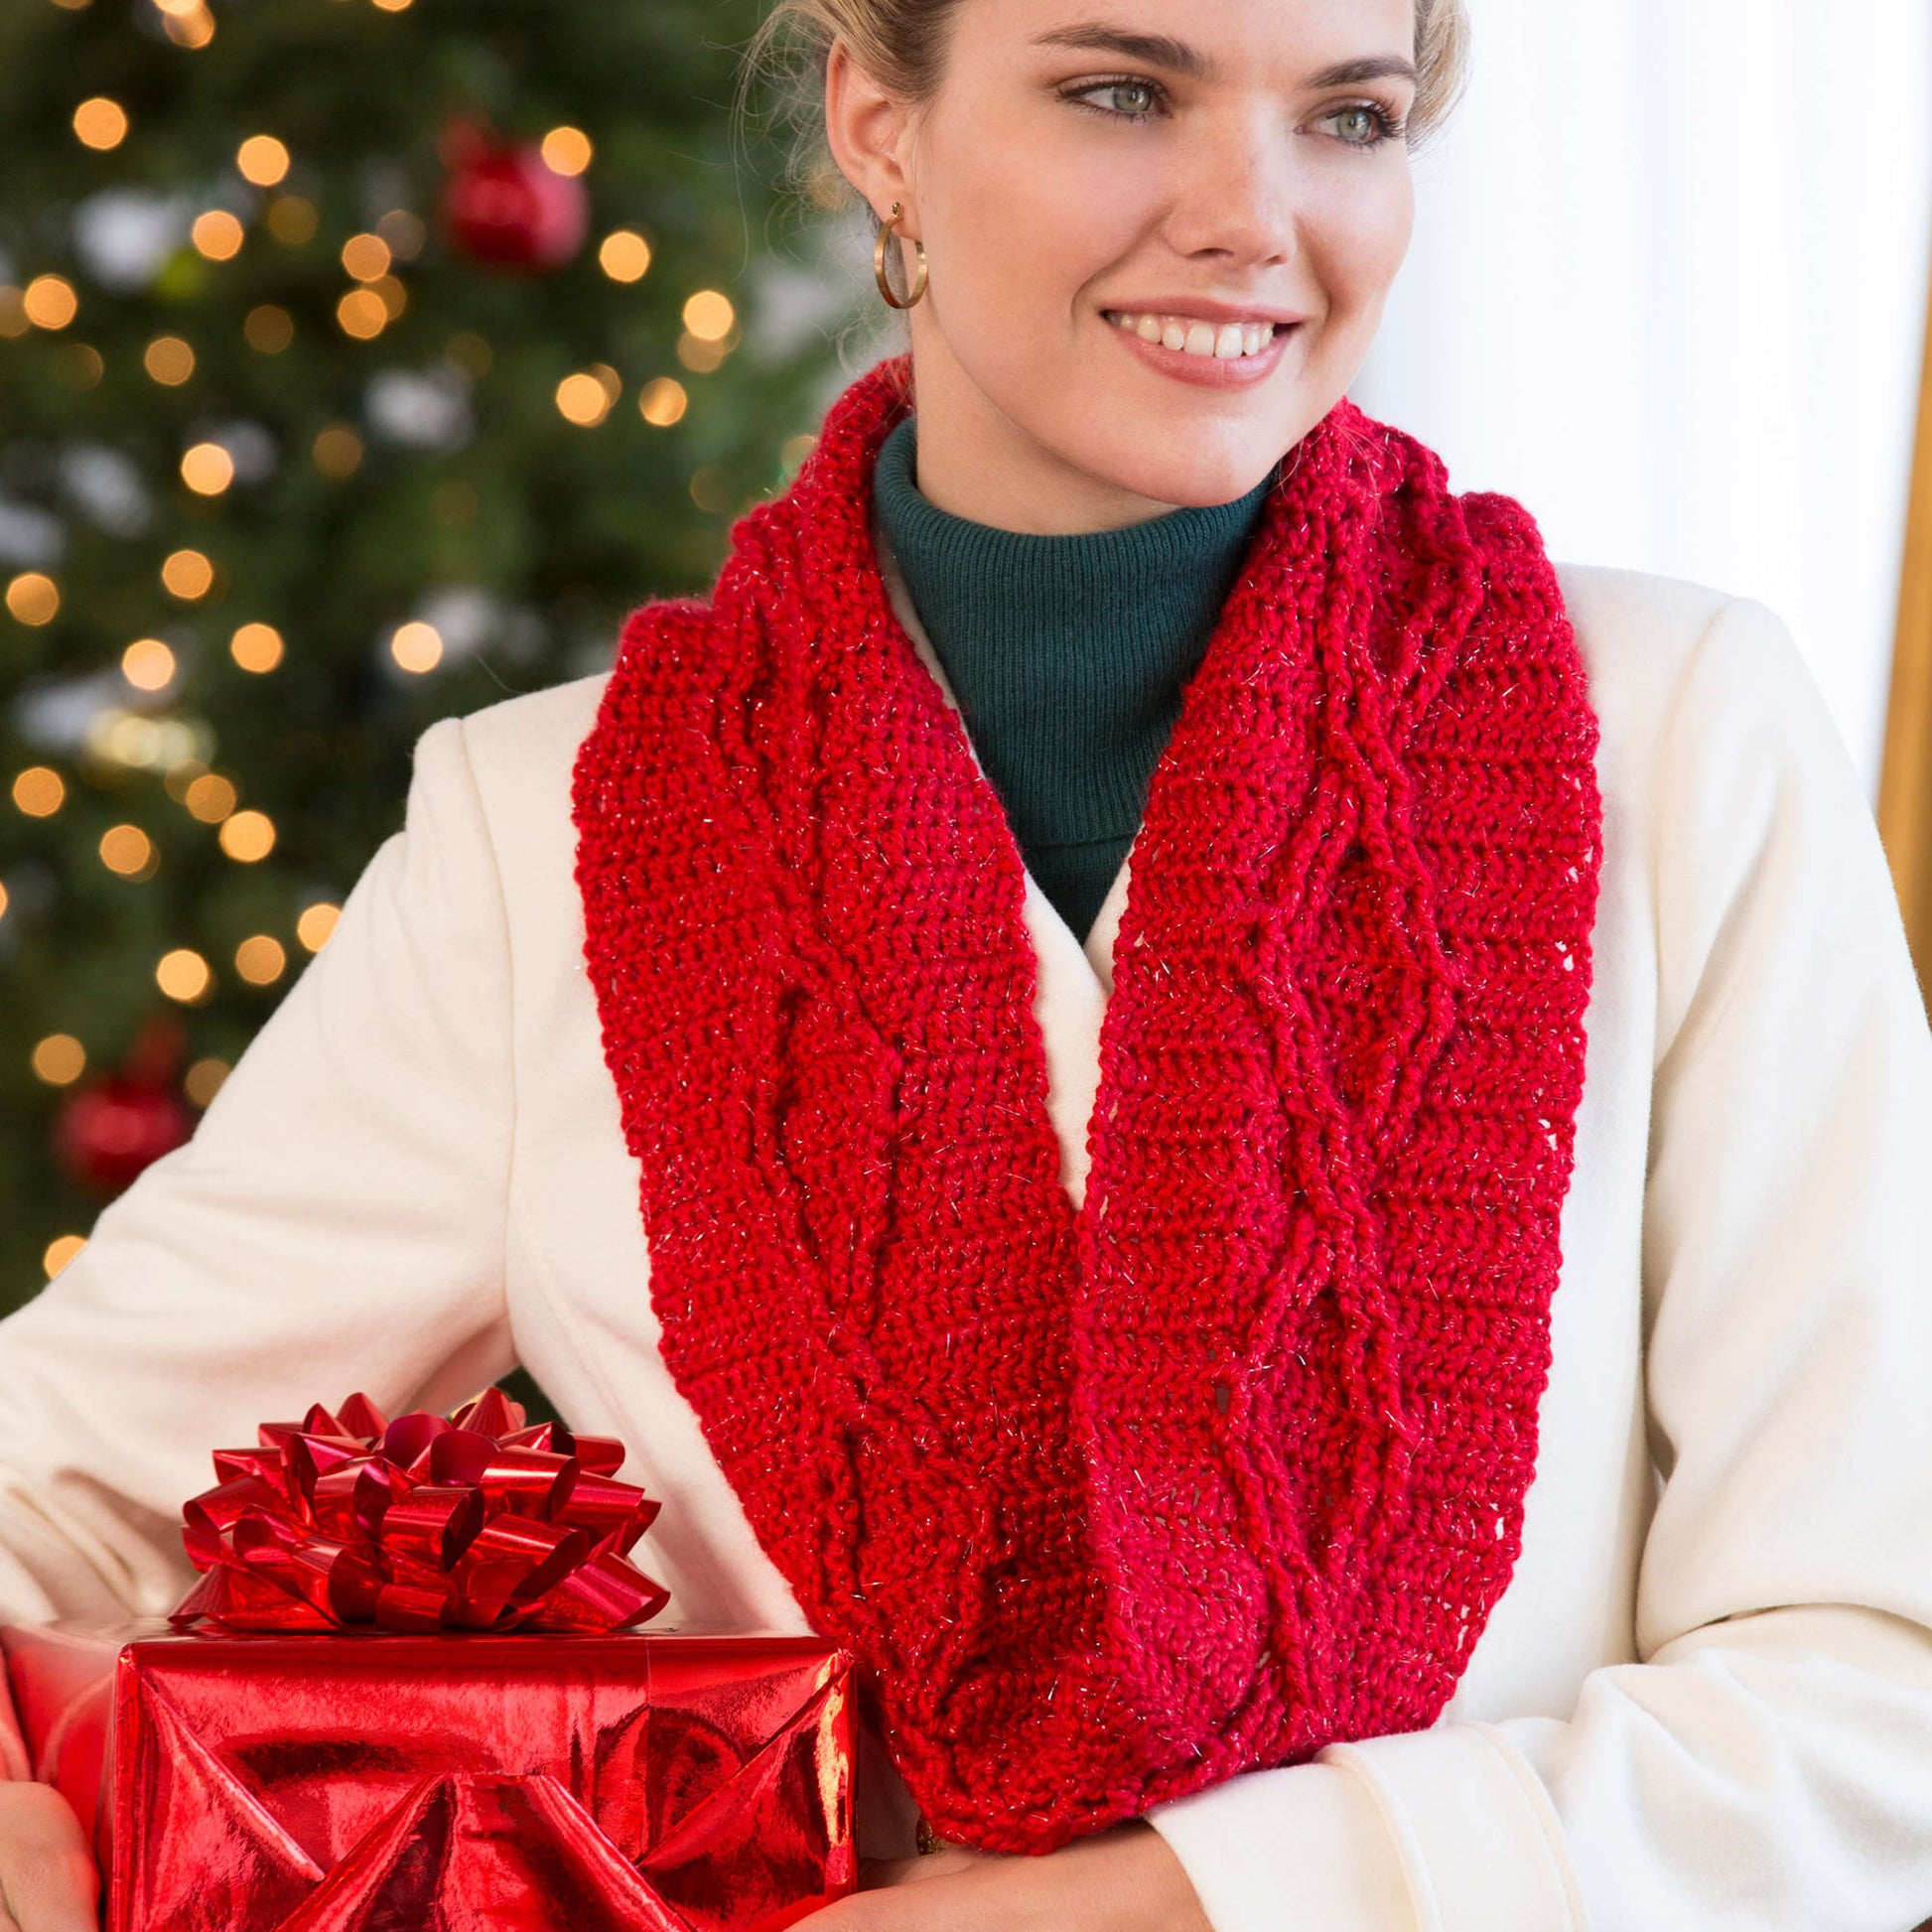 Reflective Yarn Cross Hatch Cowl for Red Heart Yarns - Cre8tion